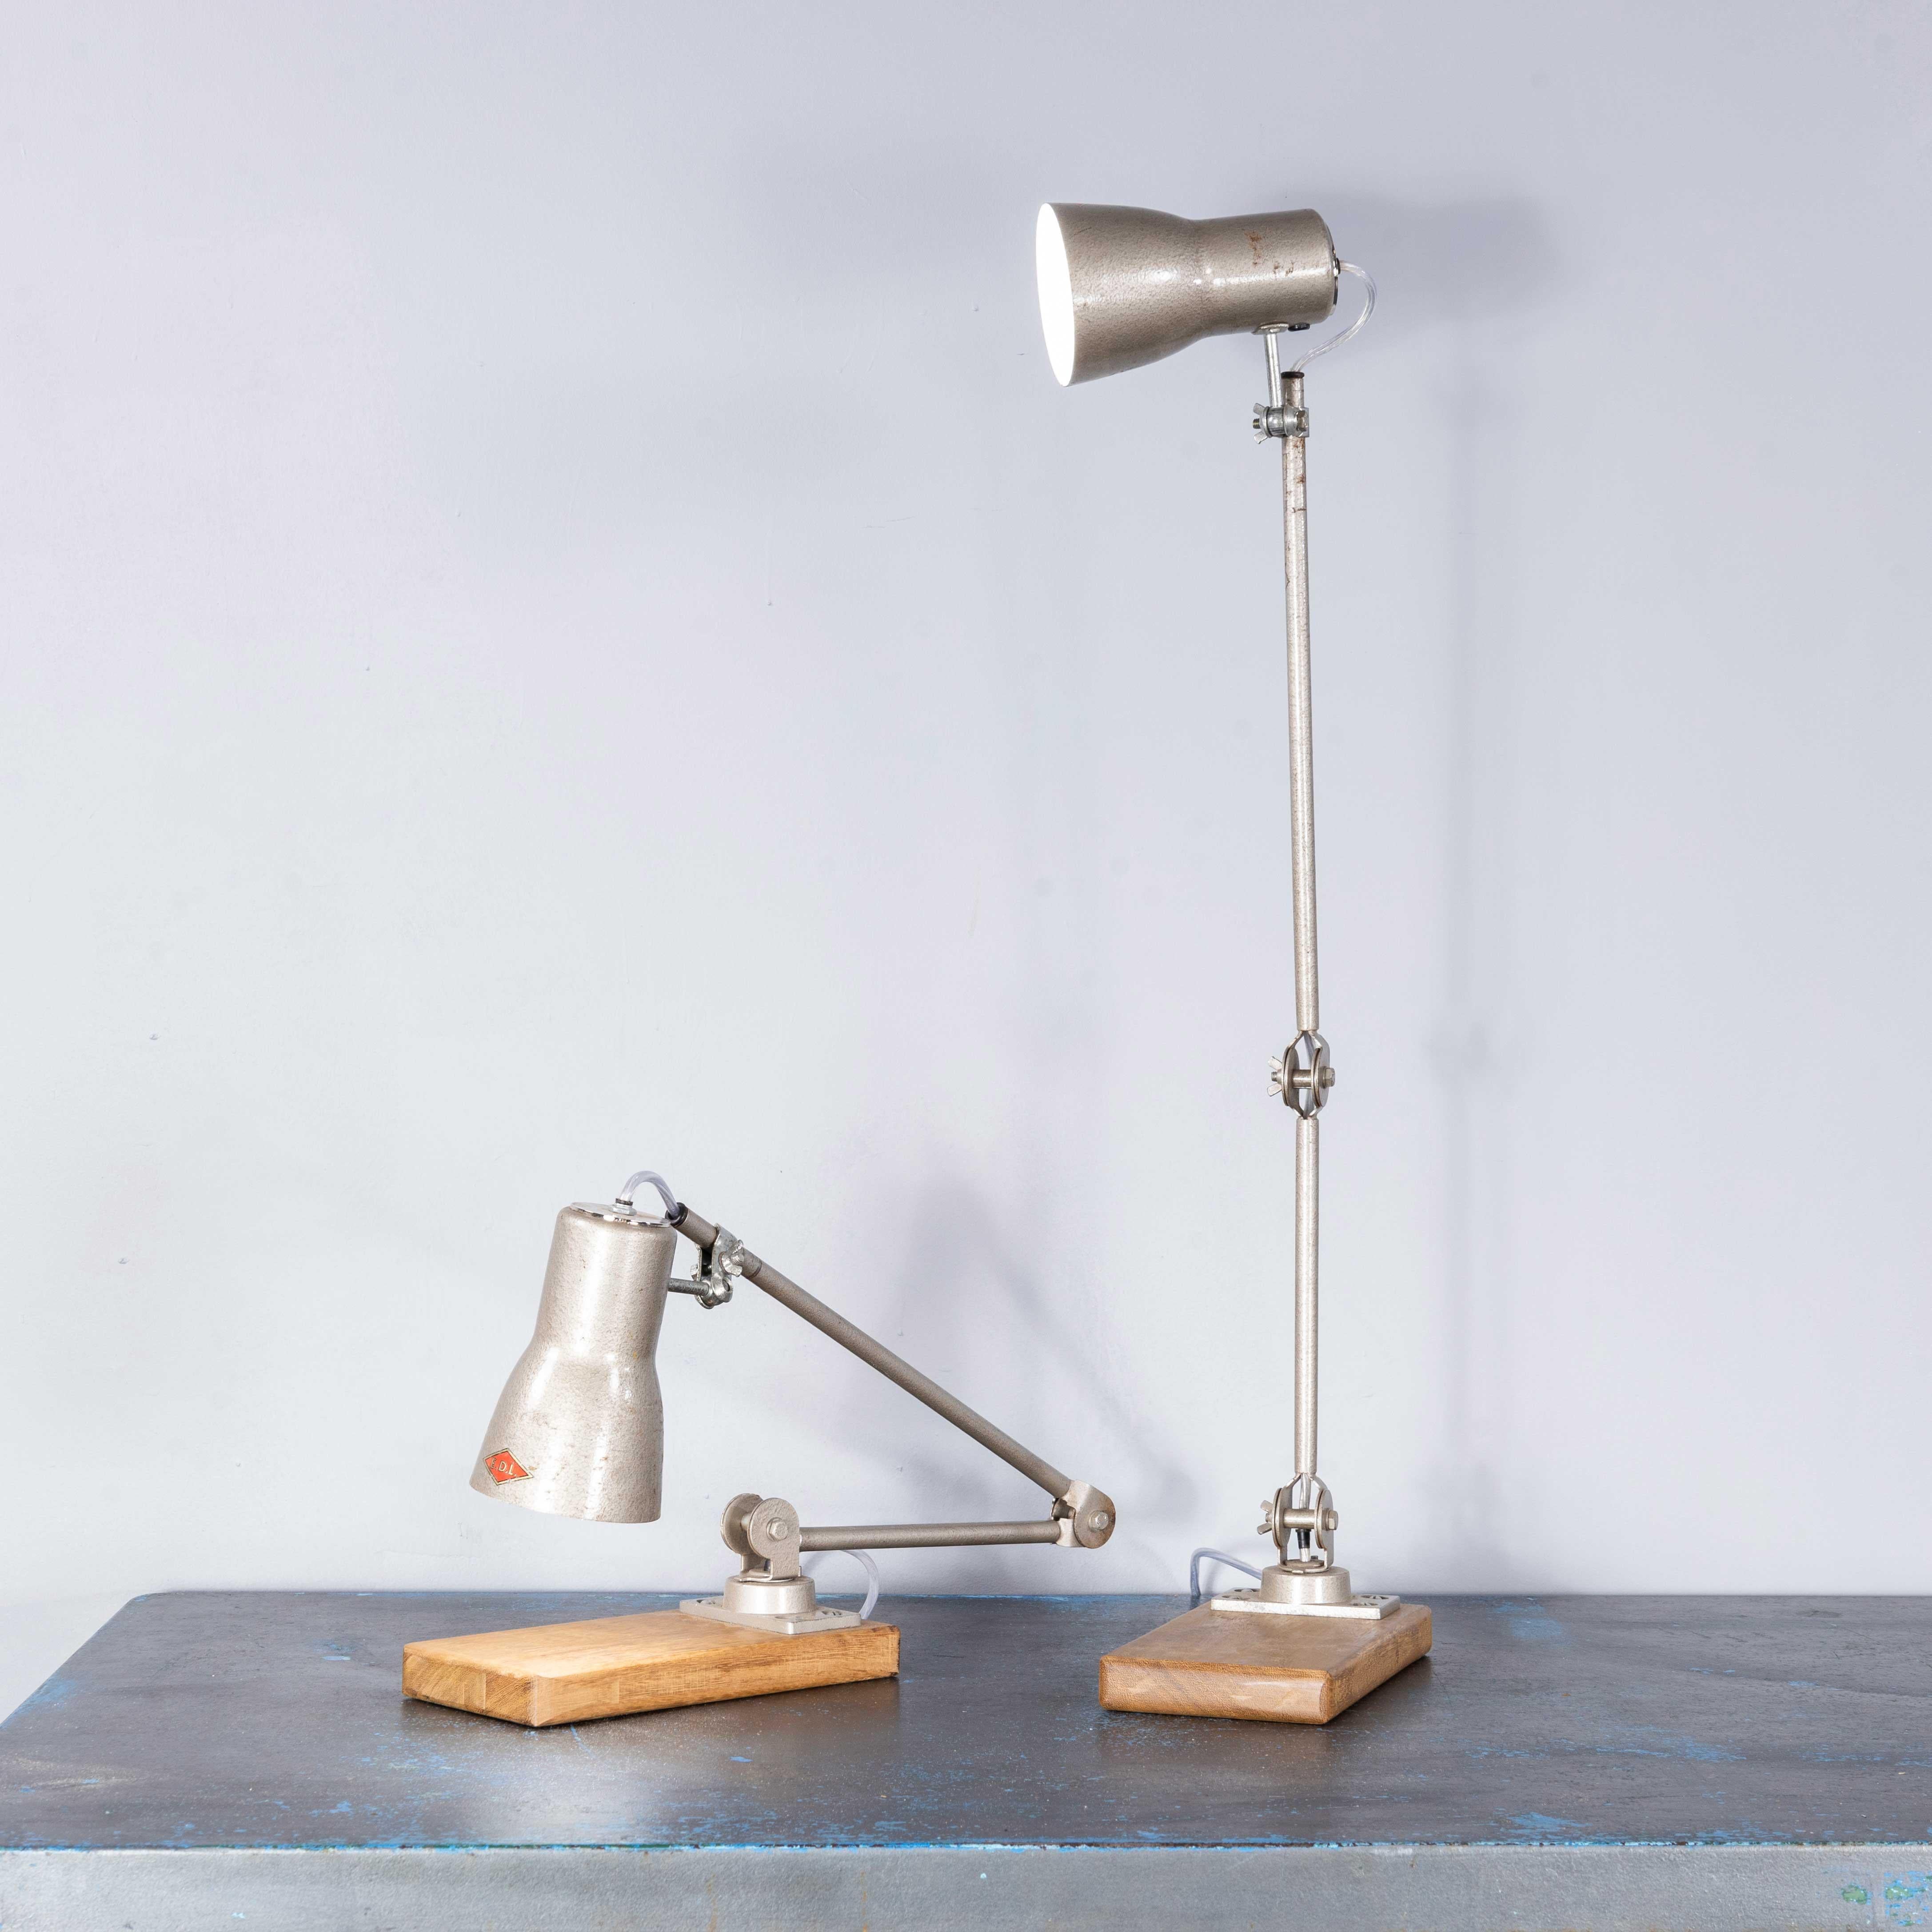 1950’s Original Articulated Machinists Desk Lamps By EDL – Pair
1950’s Original Machinists Desk Lamps By EDL – Pair. EDL started production in 1922 in Staffordshire England and is still producing to this day. This pair of lamps in classic 50’s